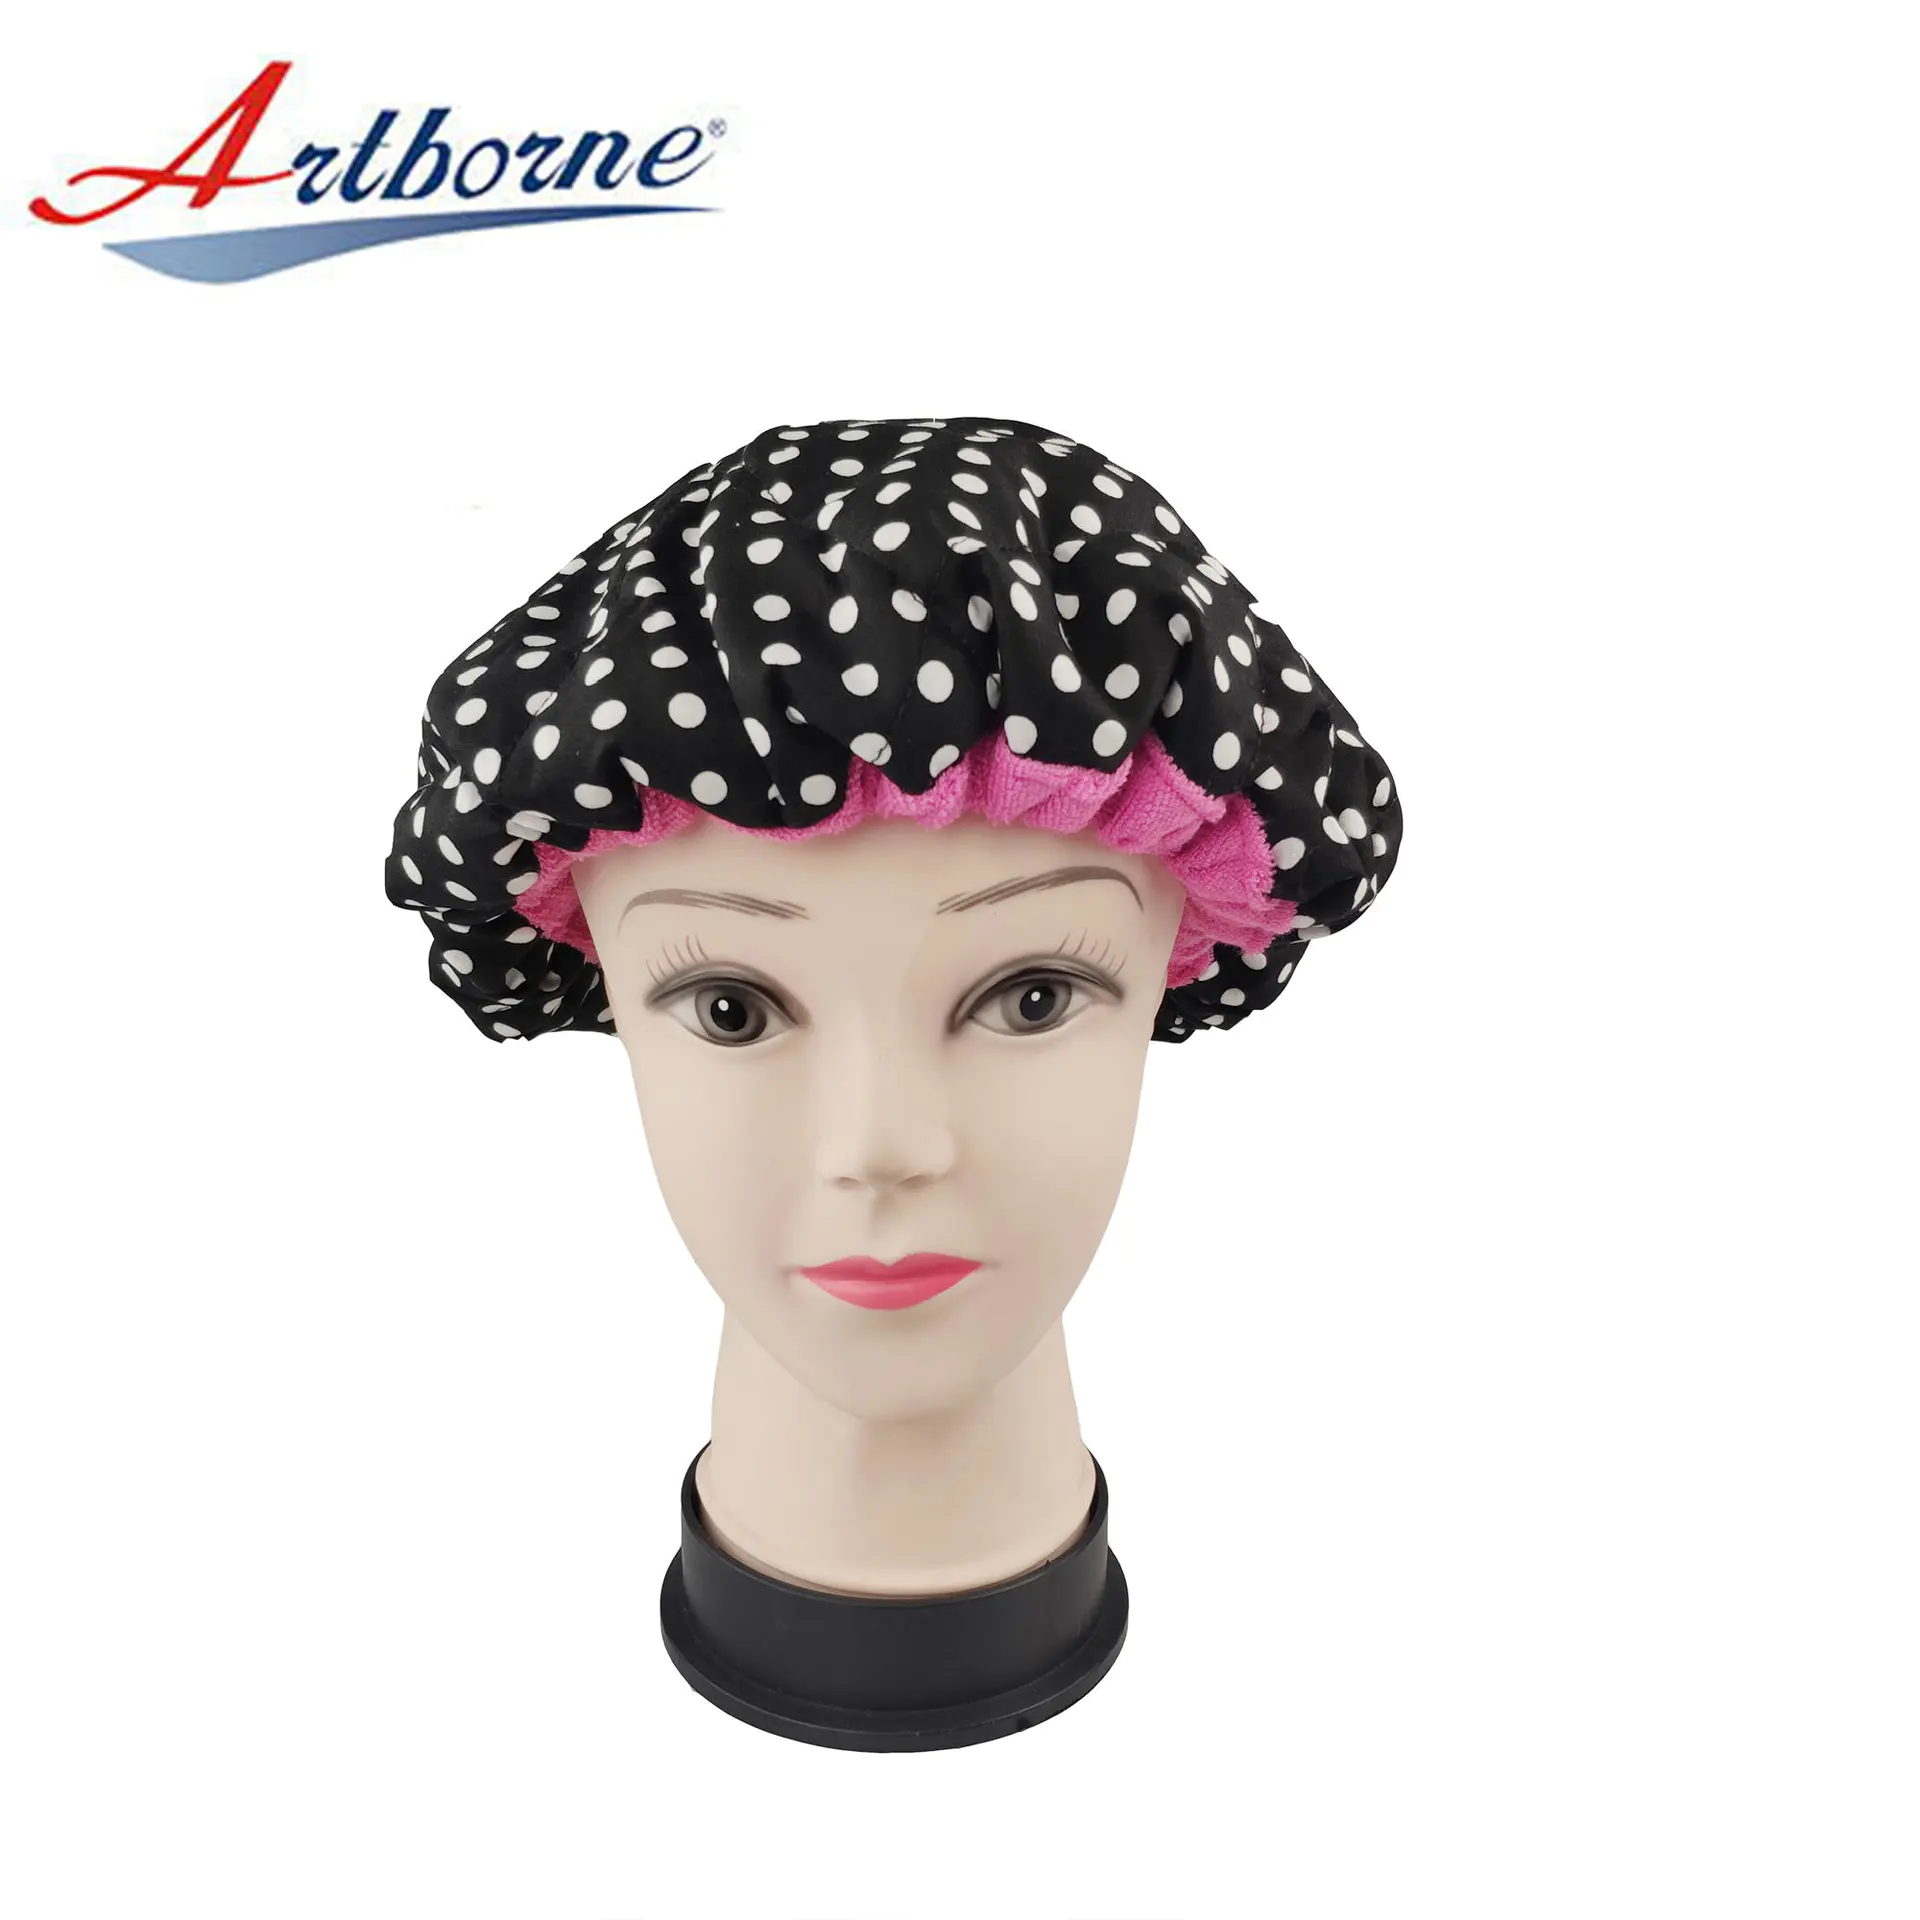 Artborne thermal thermal deep conditioning cap factory for lady-30